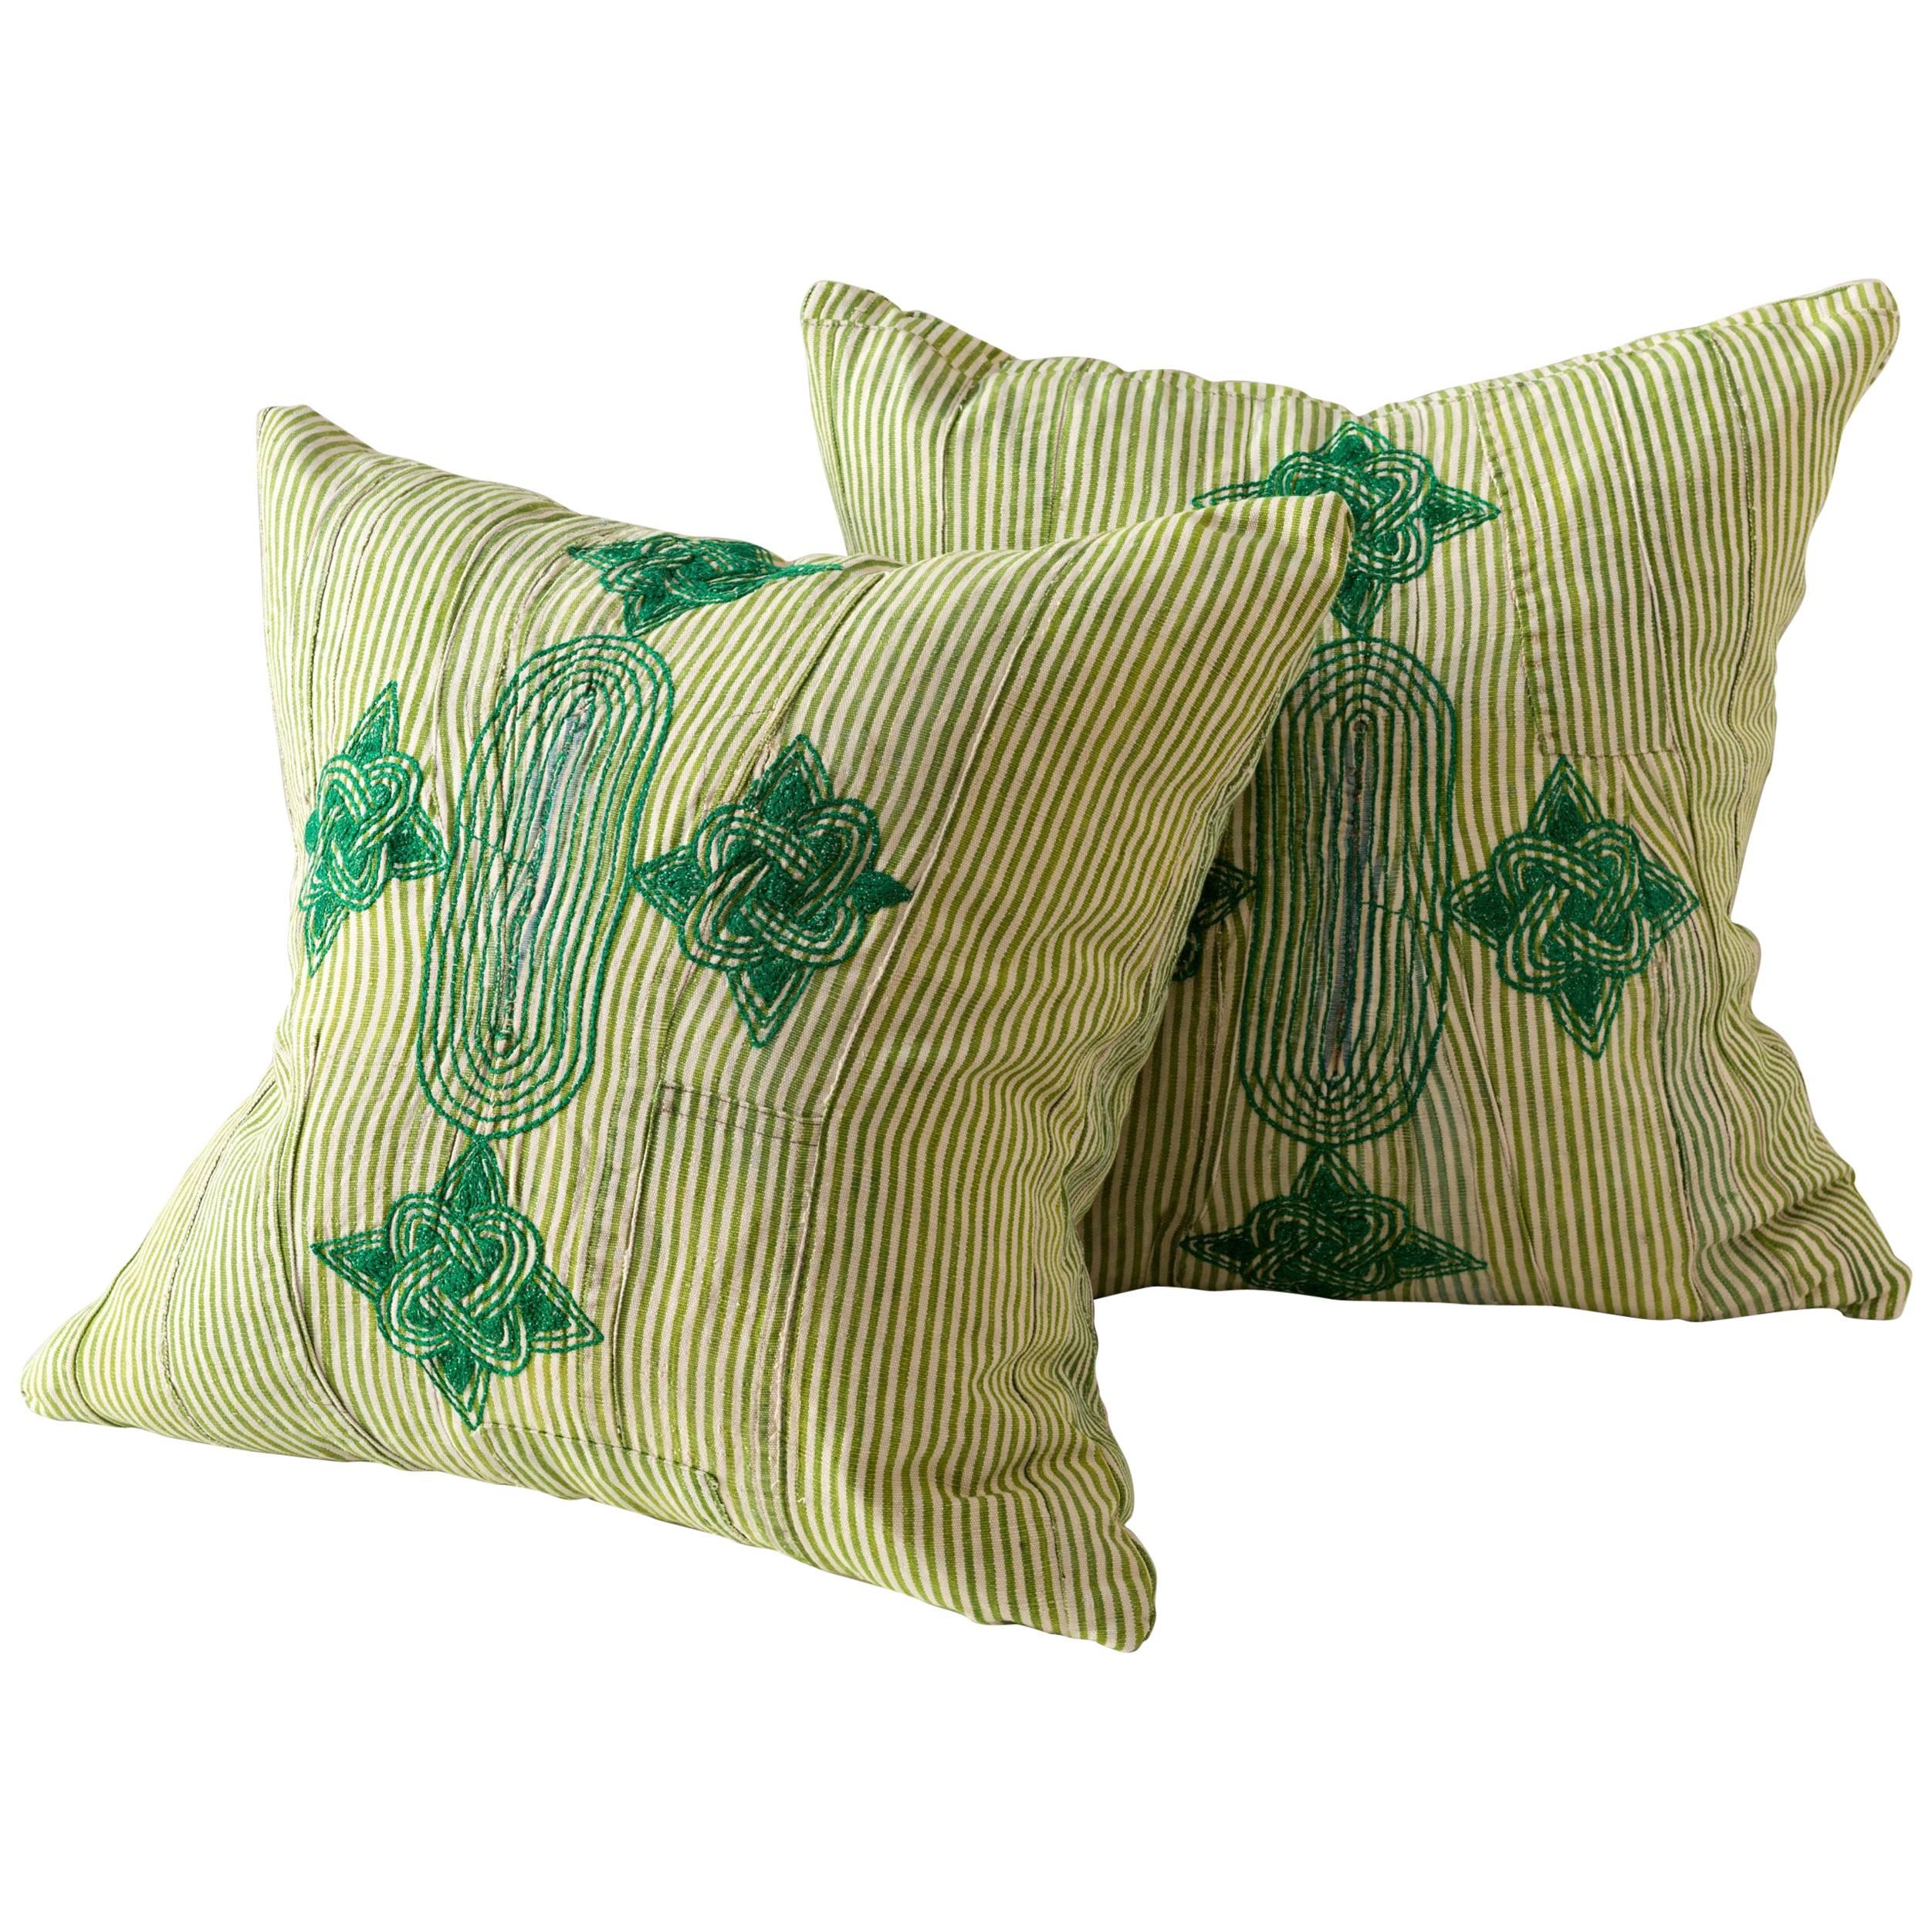 Vintage Grand Boubou Textile Pillow in Greens For Sale